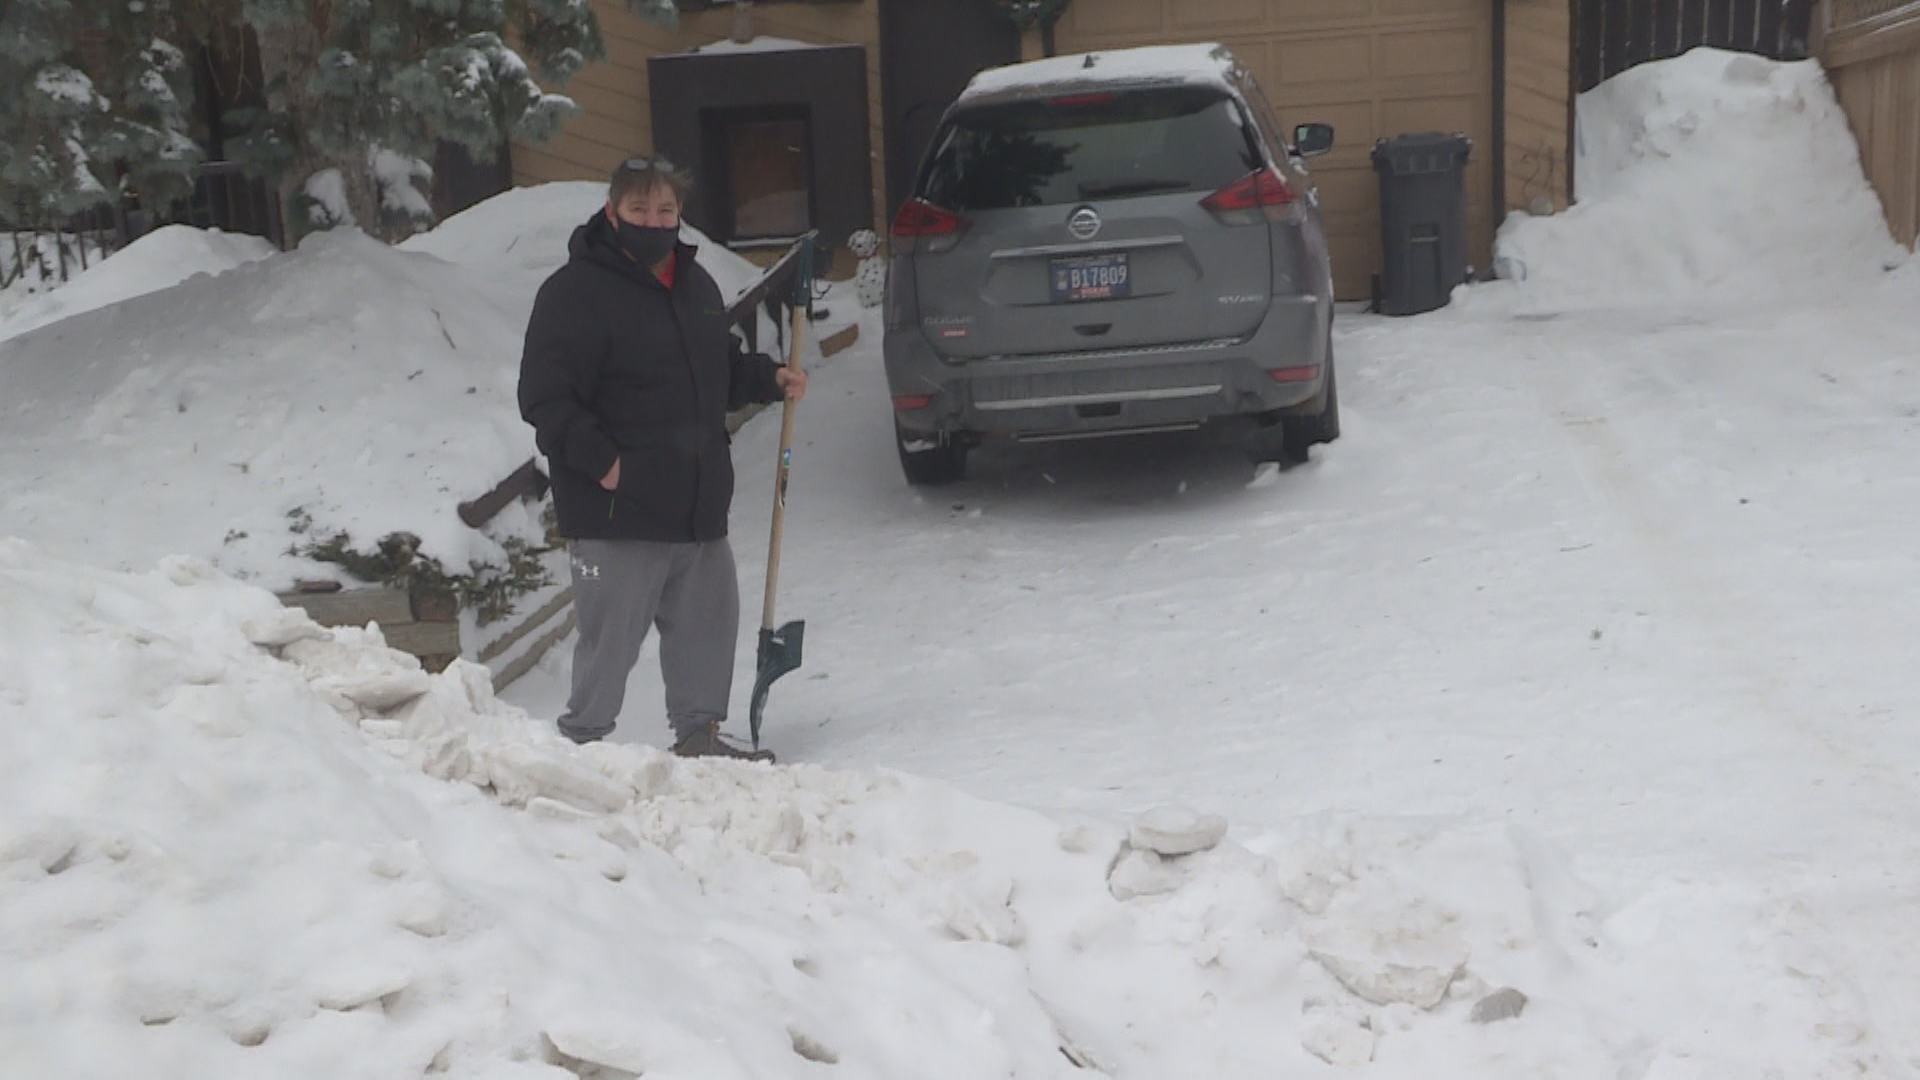 Ed Buell says it was “difficult” dealing with Winnipeg’s 311 service as he sought to have a snow pile removed from the end of his driveway.